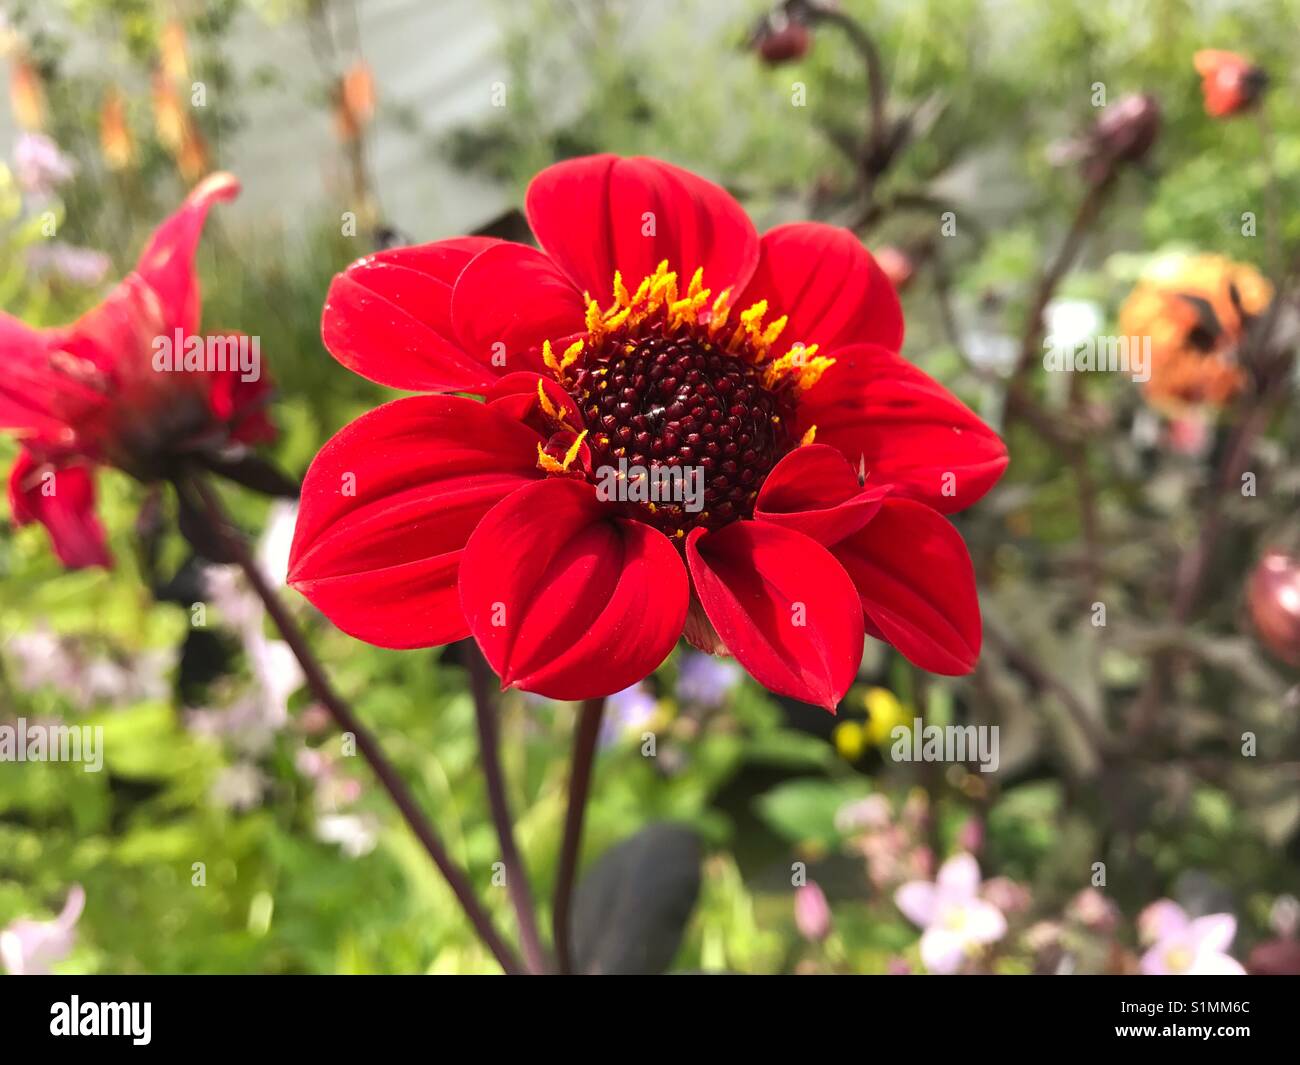 Red flower with yellow stamens Stock Photo